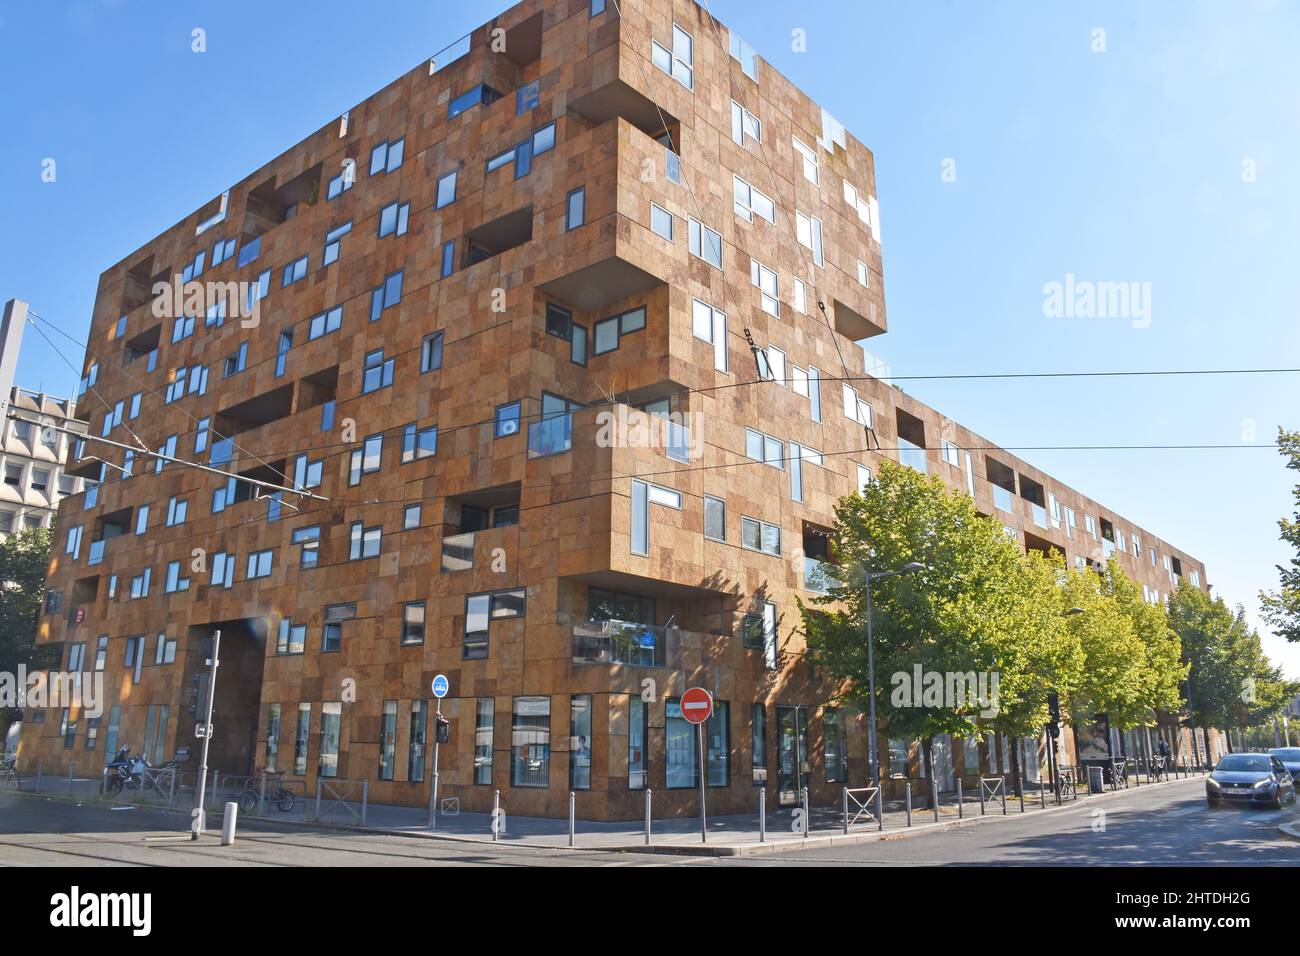 Square Pey Berland, a large modern apartment building in Bordeaux,  mostly 8 storeys, something of a Lego-look, various shades of brown stone cladding Stock Photo